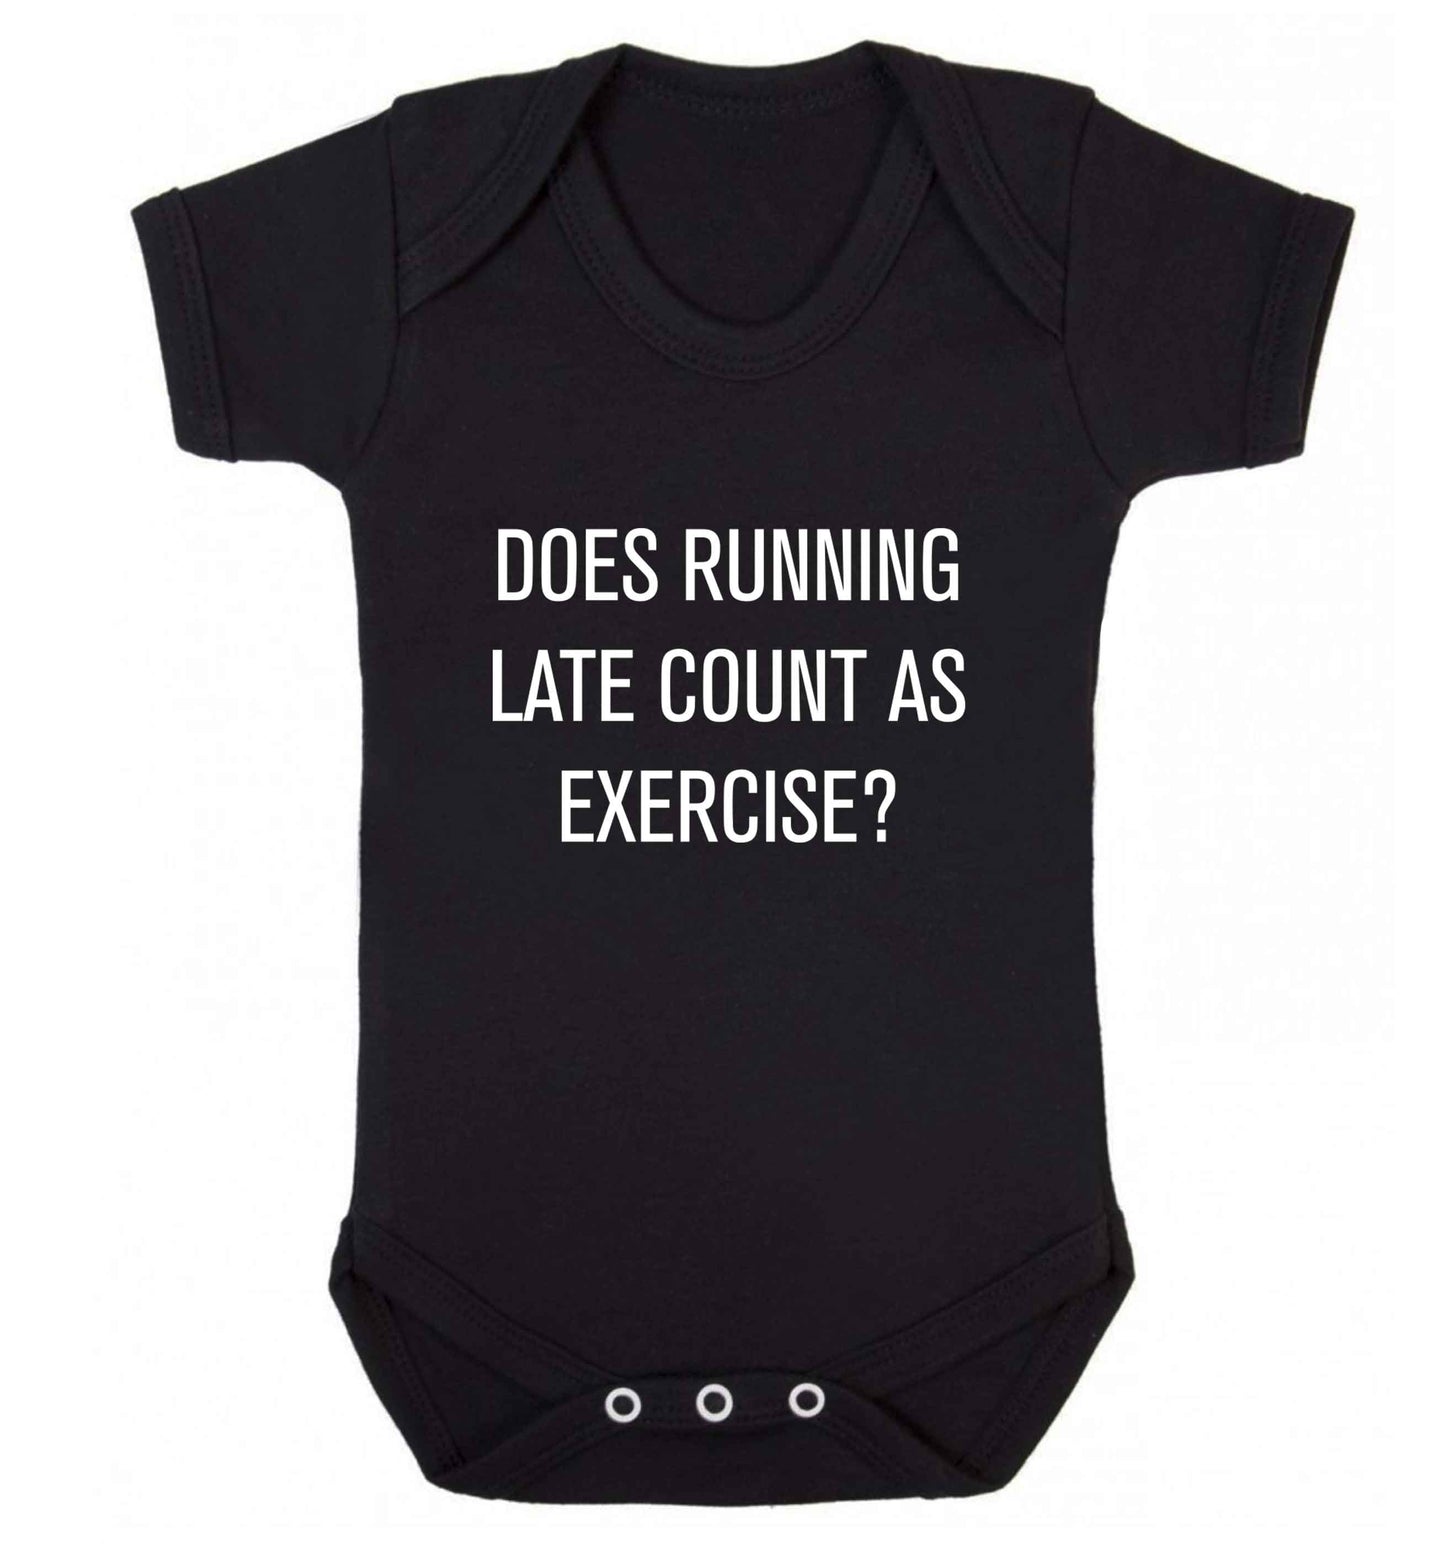 Does running late count as exercise? baby vest black 18-24 months